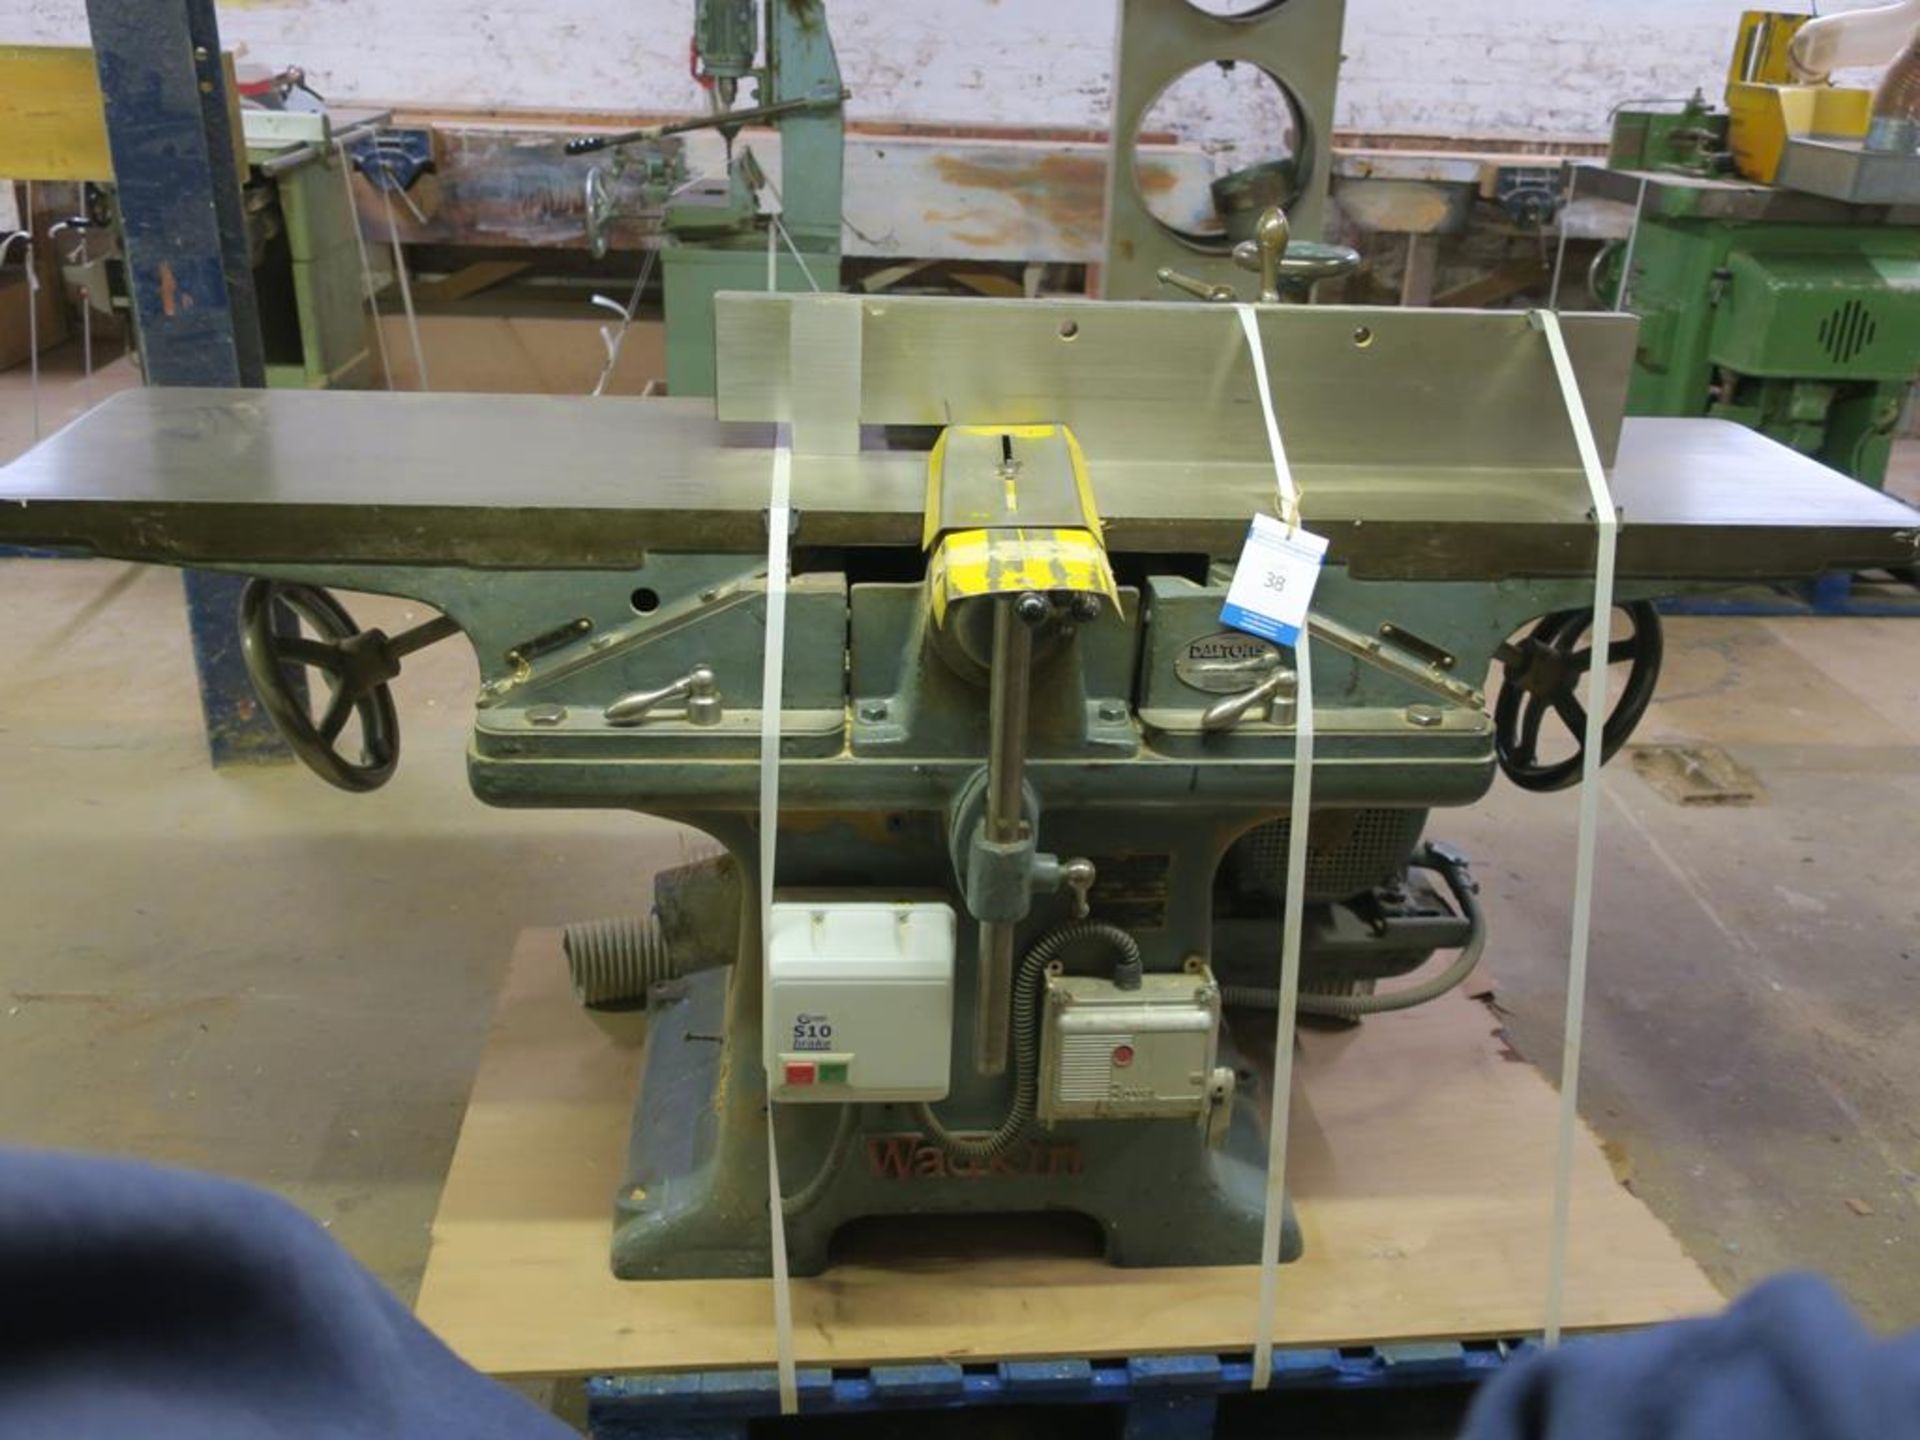 * Wadkin RD Planer, 3PH, 415V, Model No: RD371, table size 1840mm x 430mm. Please note this lot is